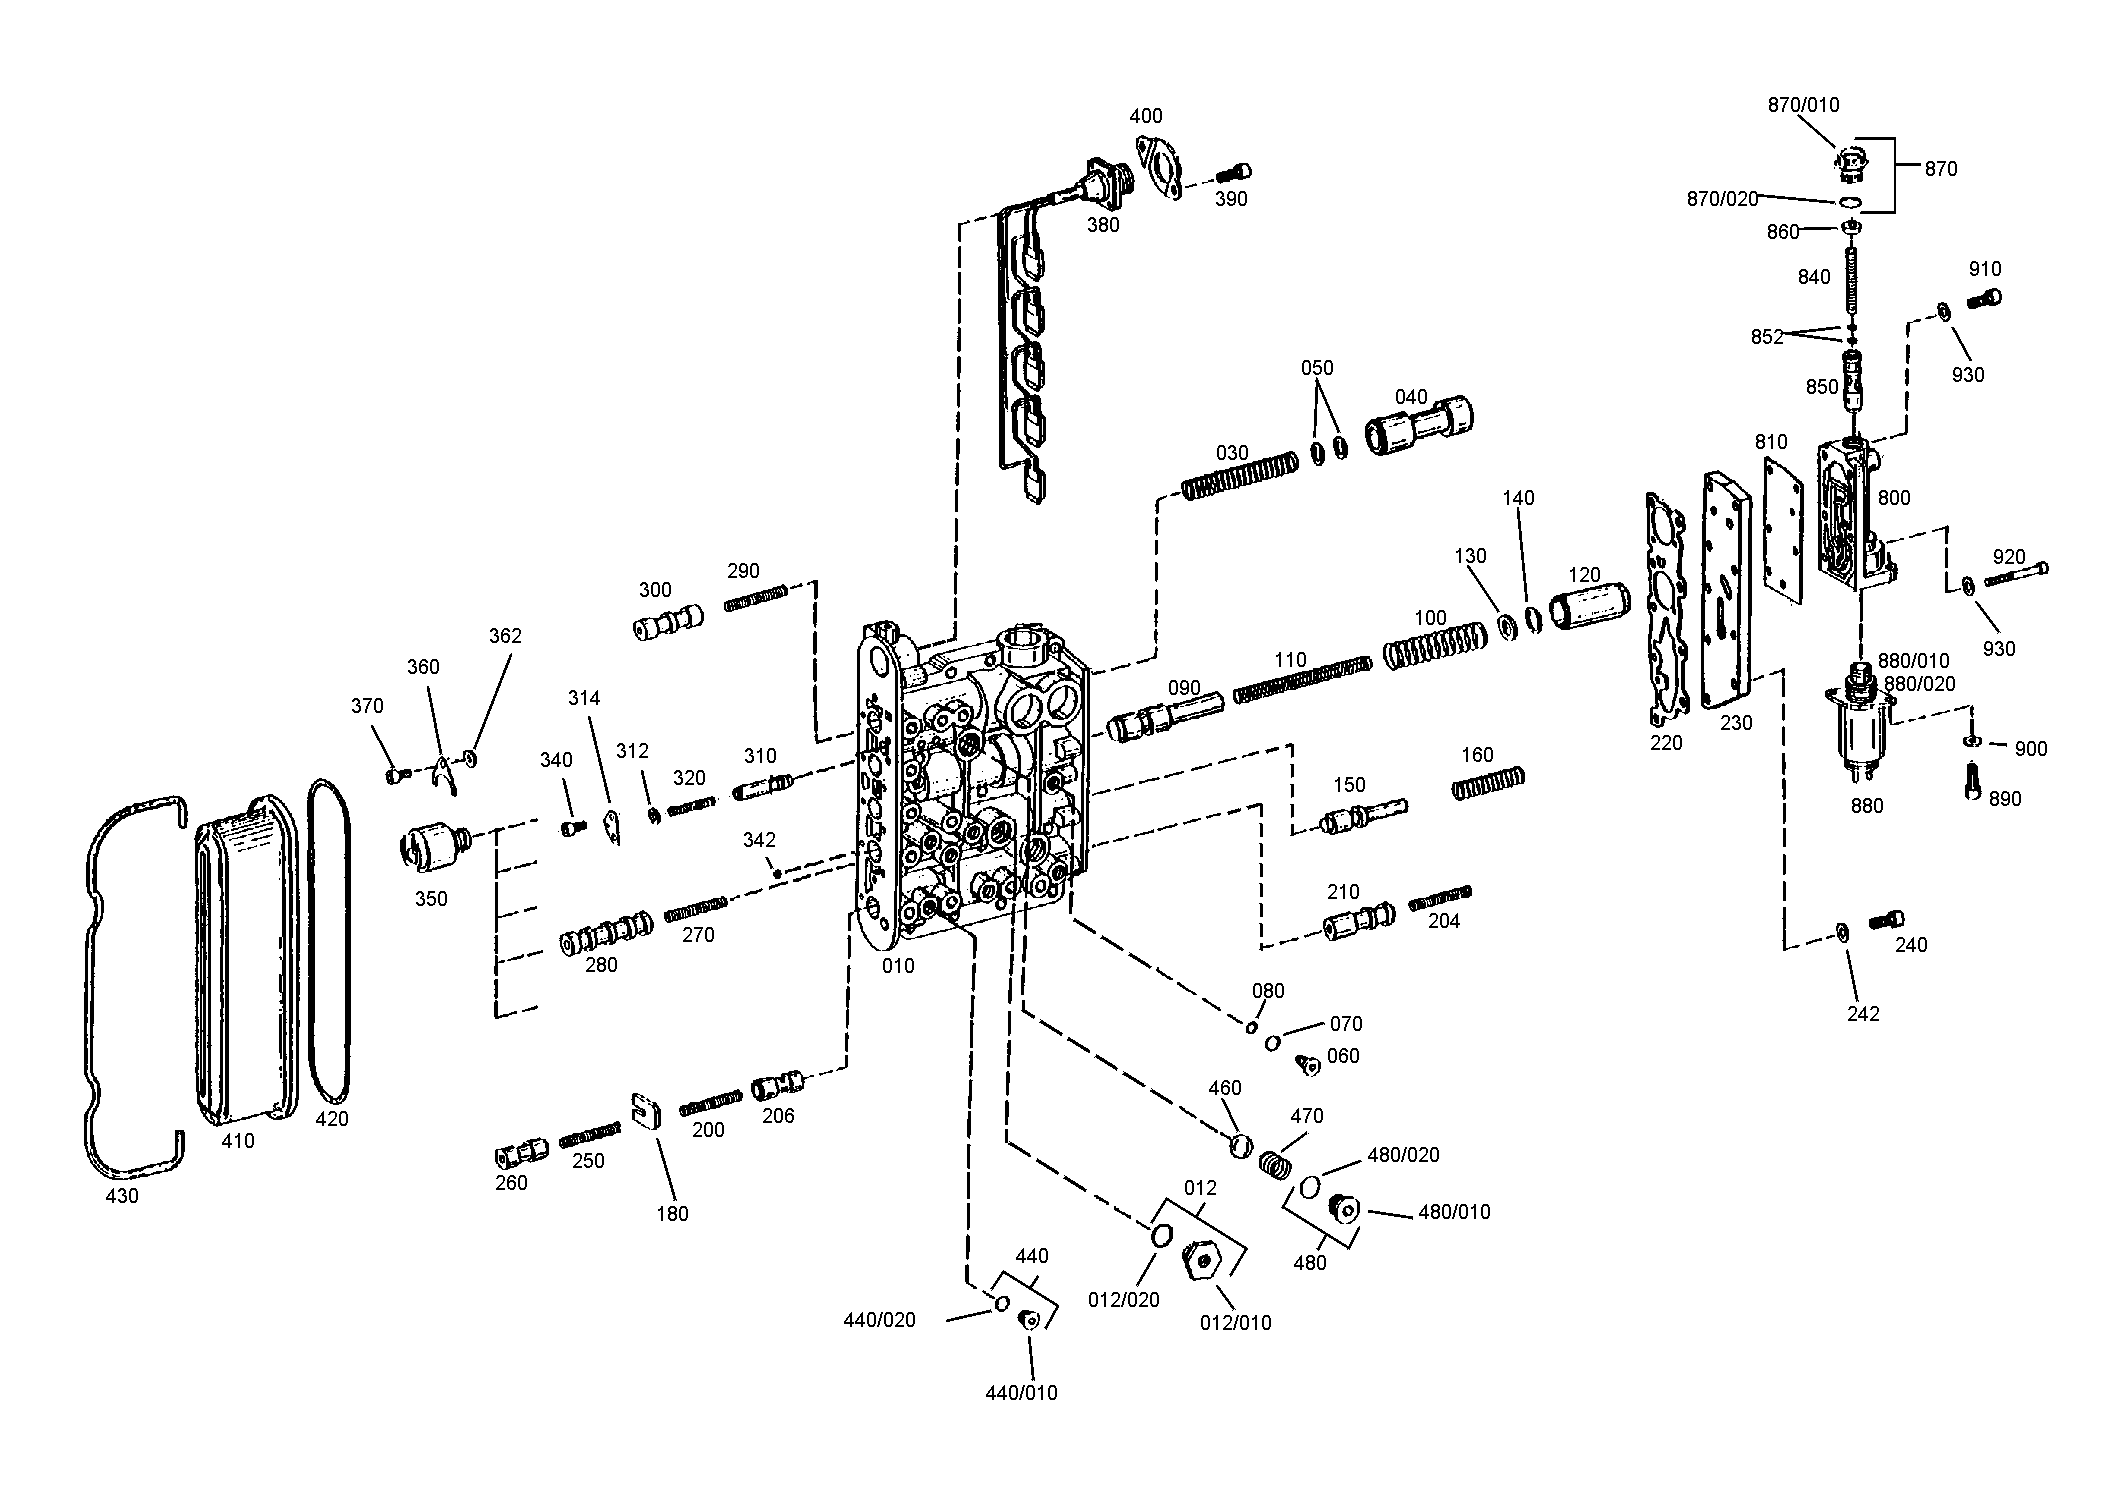 drawing for BEISSBARTH & MUELLER GMBH & CO. 15268837 - GEAR SHIFT HOUSING (figure 4)